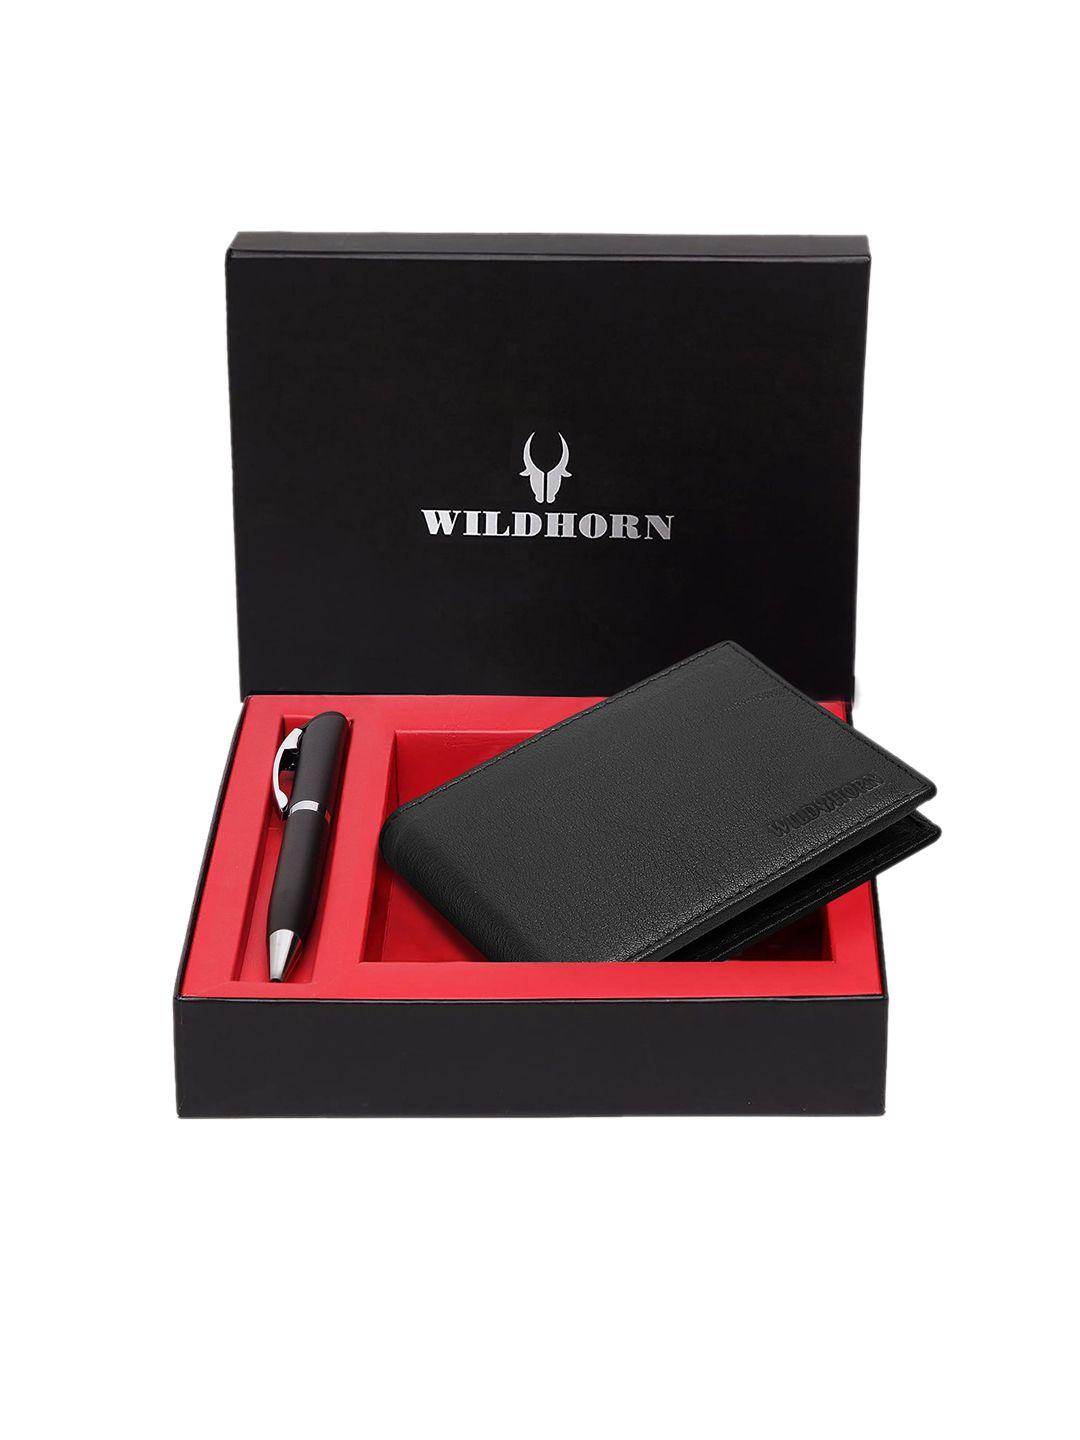 wildhorn men black & silver-toned rfid protected genuine leather accessory gift set